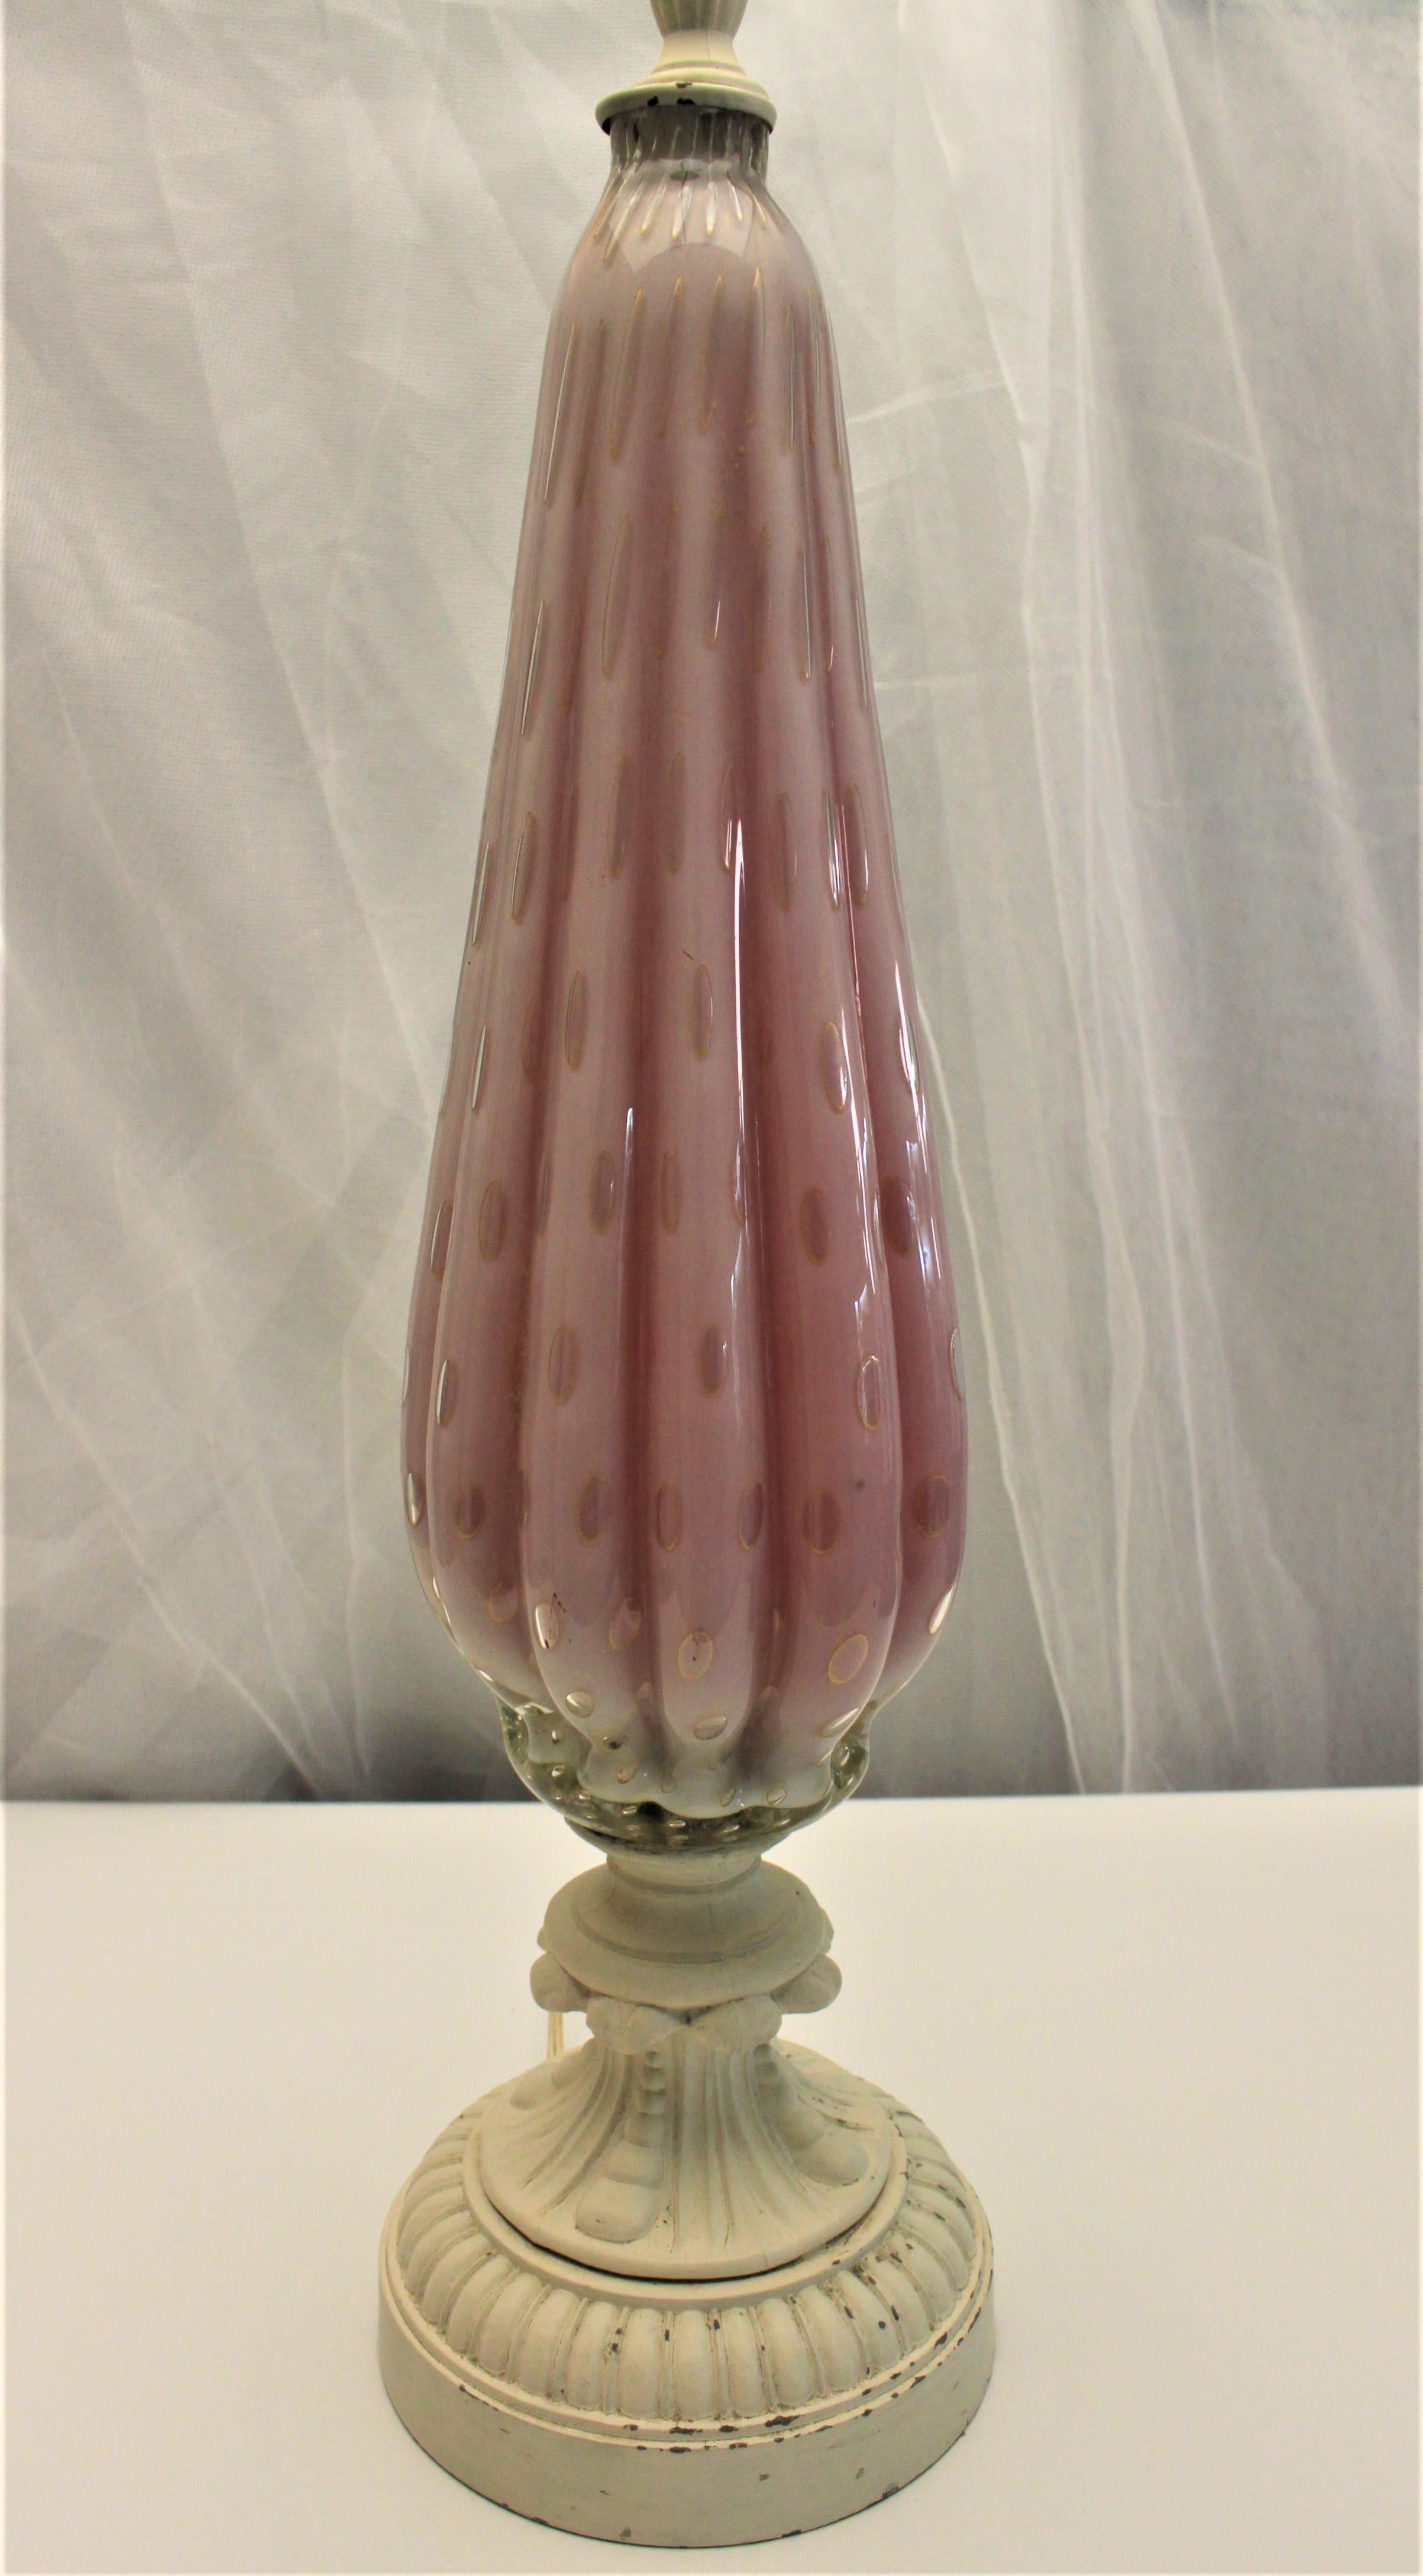 This Mid-Century Modern art glass table lamp is done with pink art glass with controlled bubbles and gold flecks or aventurine with a tapered and ribbed body and accented with an off white painted metal top and base. It is presumed this lamp was